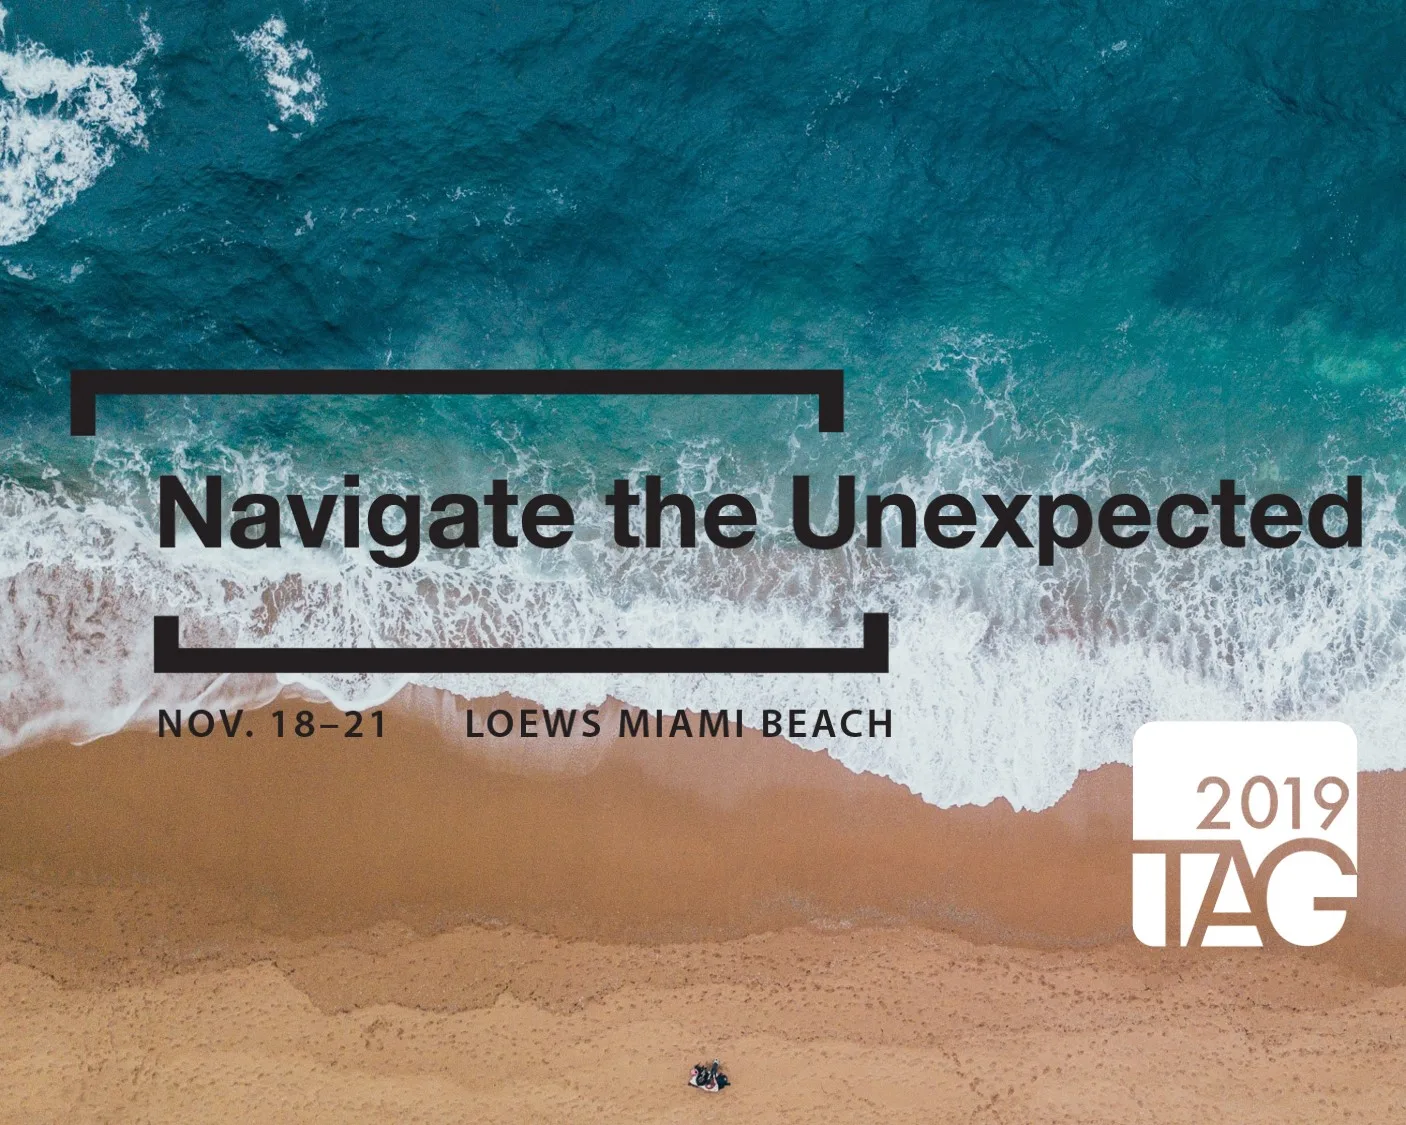 Navigate the Unexpected TAG 2019 Miami